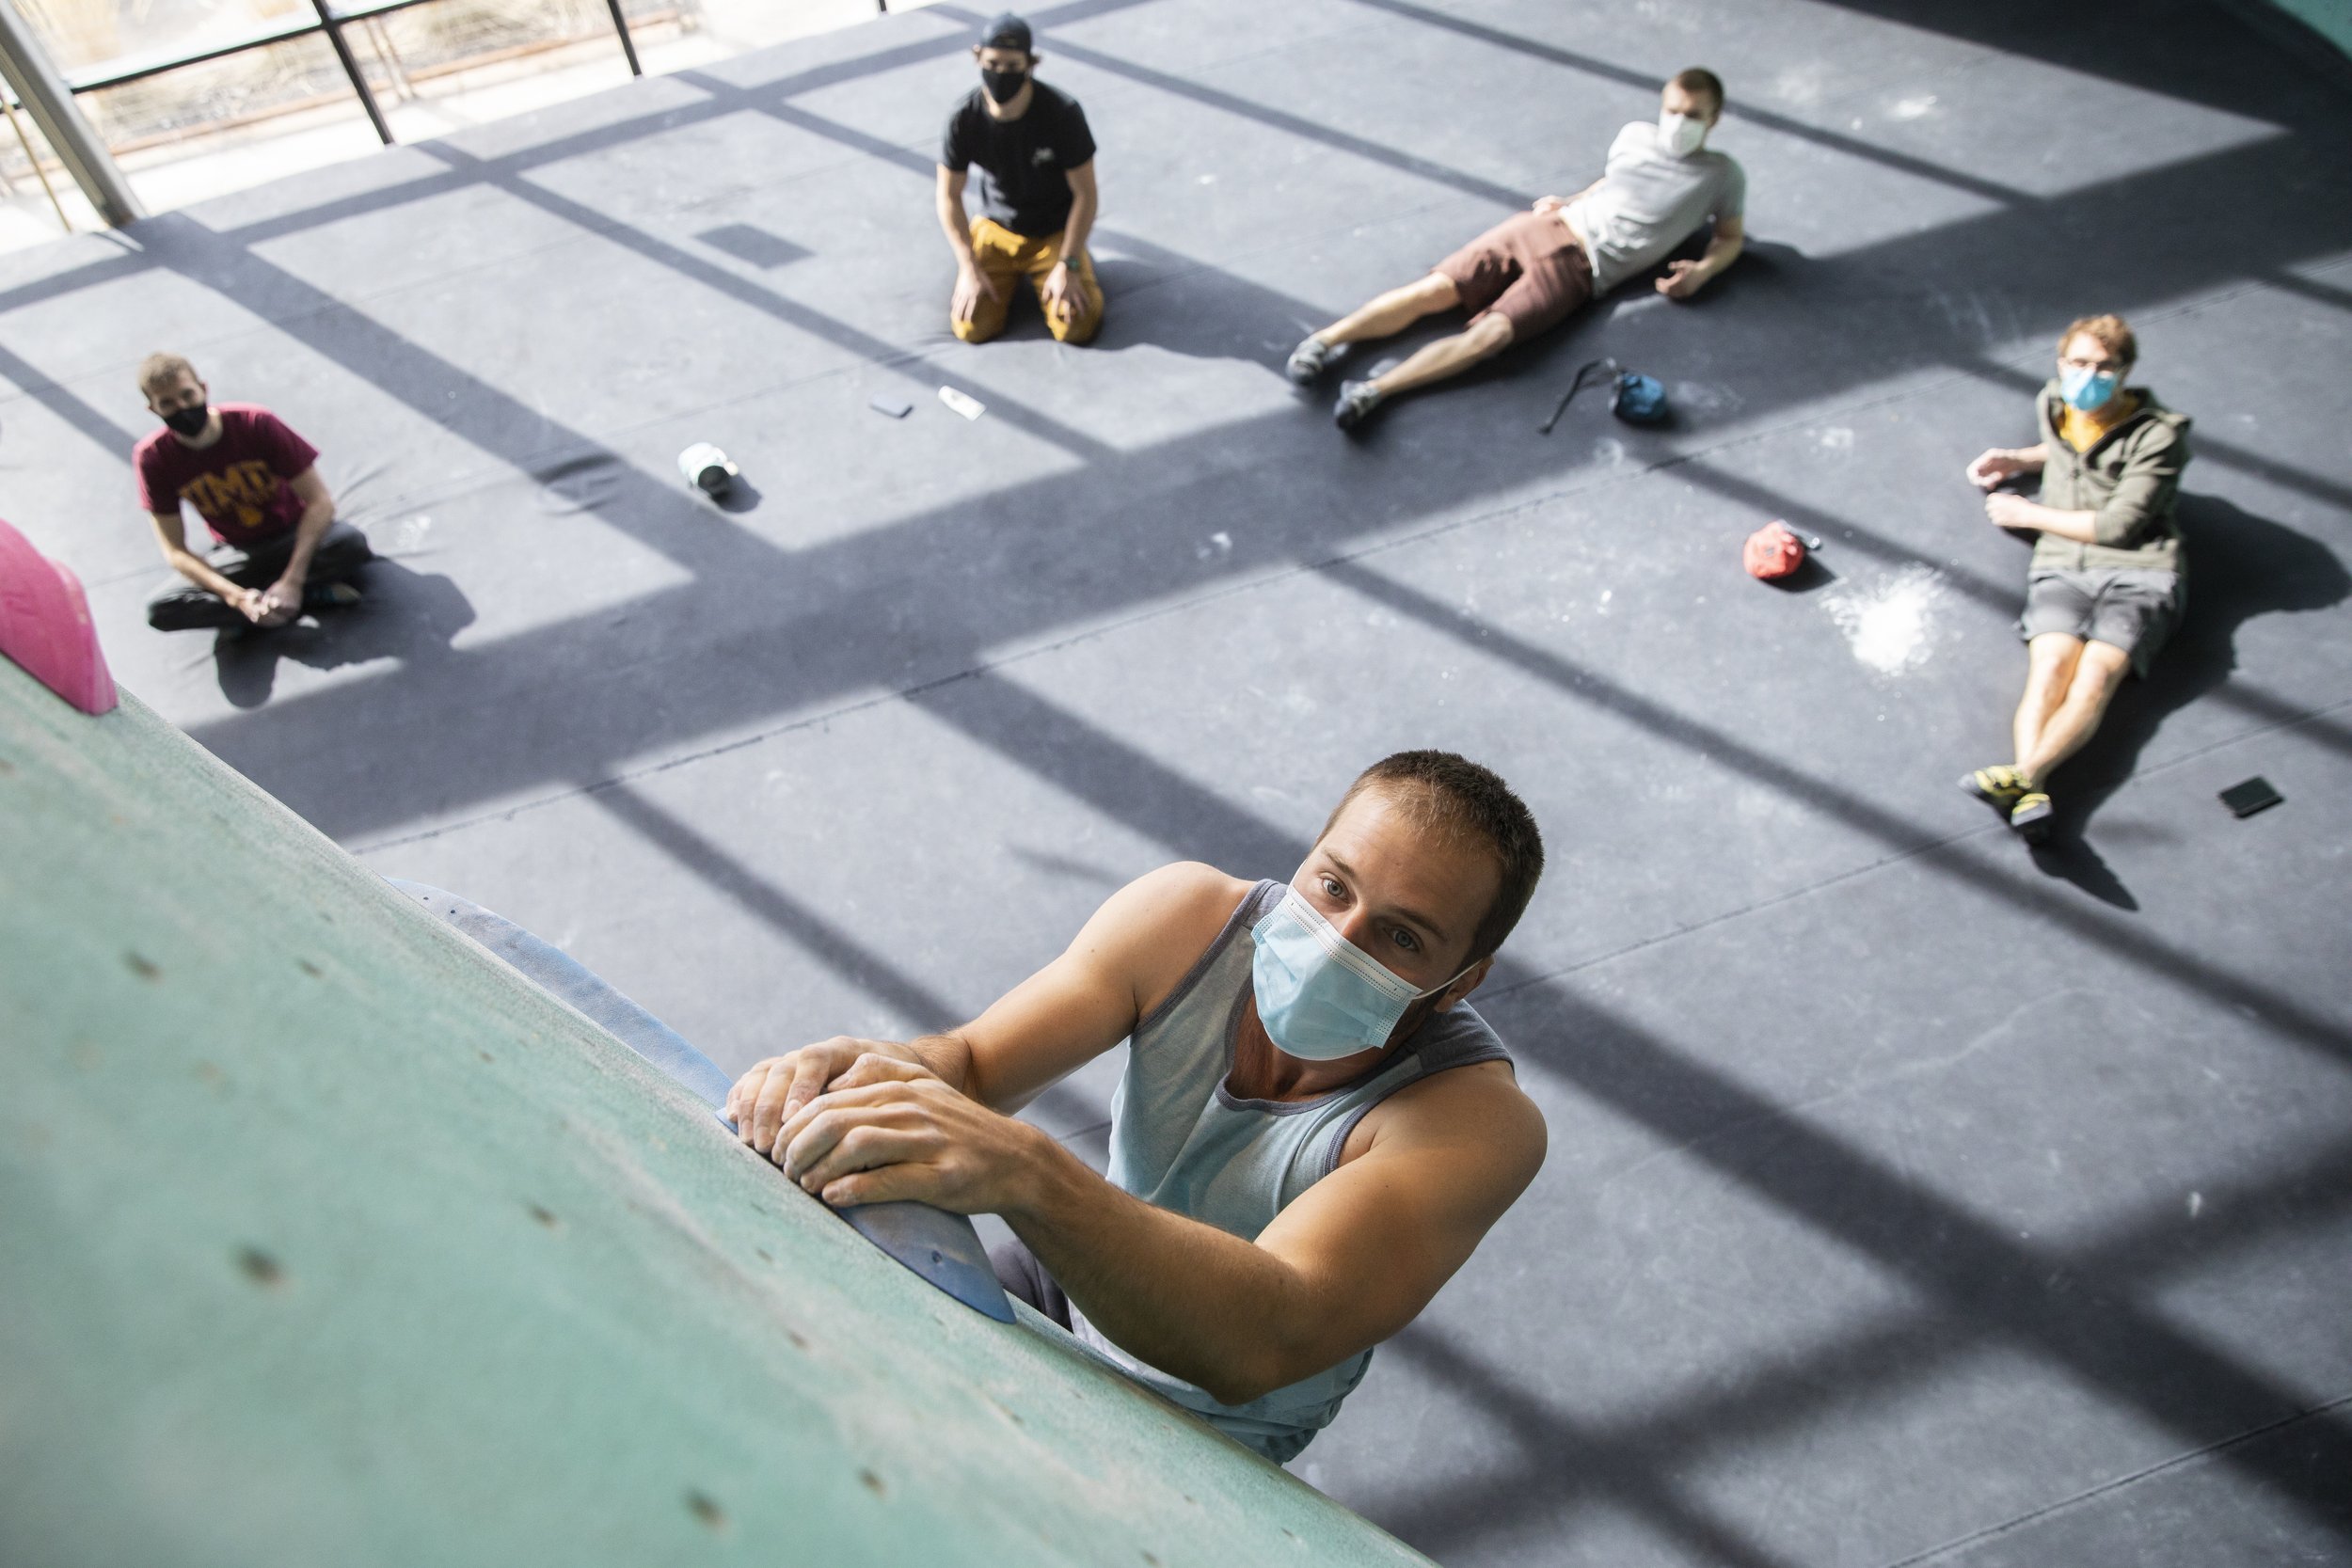  Kyle Fuerstenberg climbs at the Minneapolis Bouldering Project climbing gym in Minneapolis on Sunday morning, March 7, 2021. Operating at a quarter of it’s normal capacity, the gym has it’s guests take a temperature check, wear a mask, and both sani